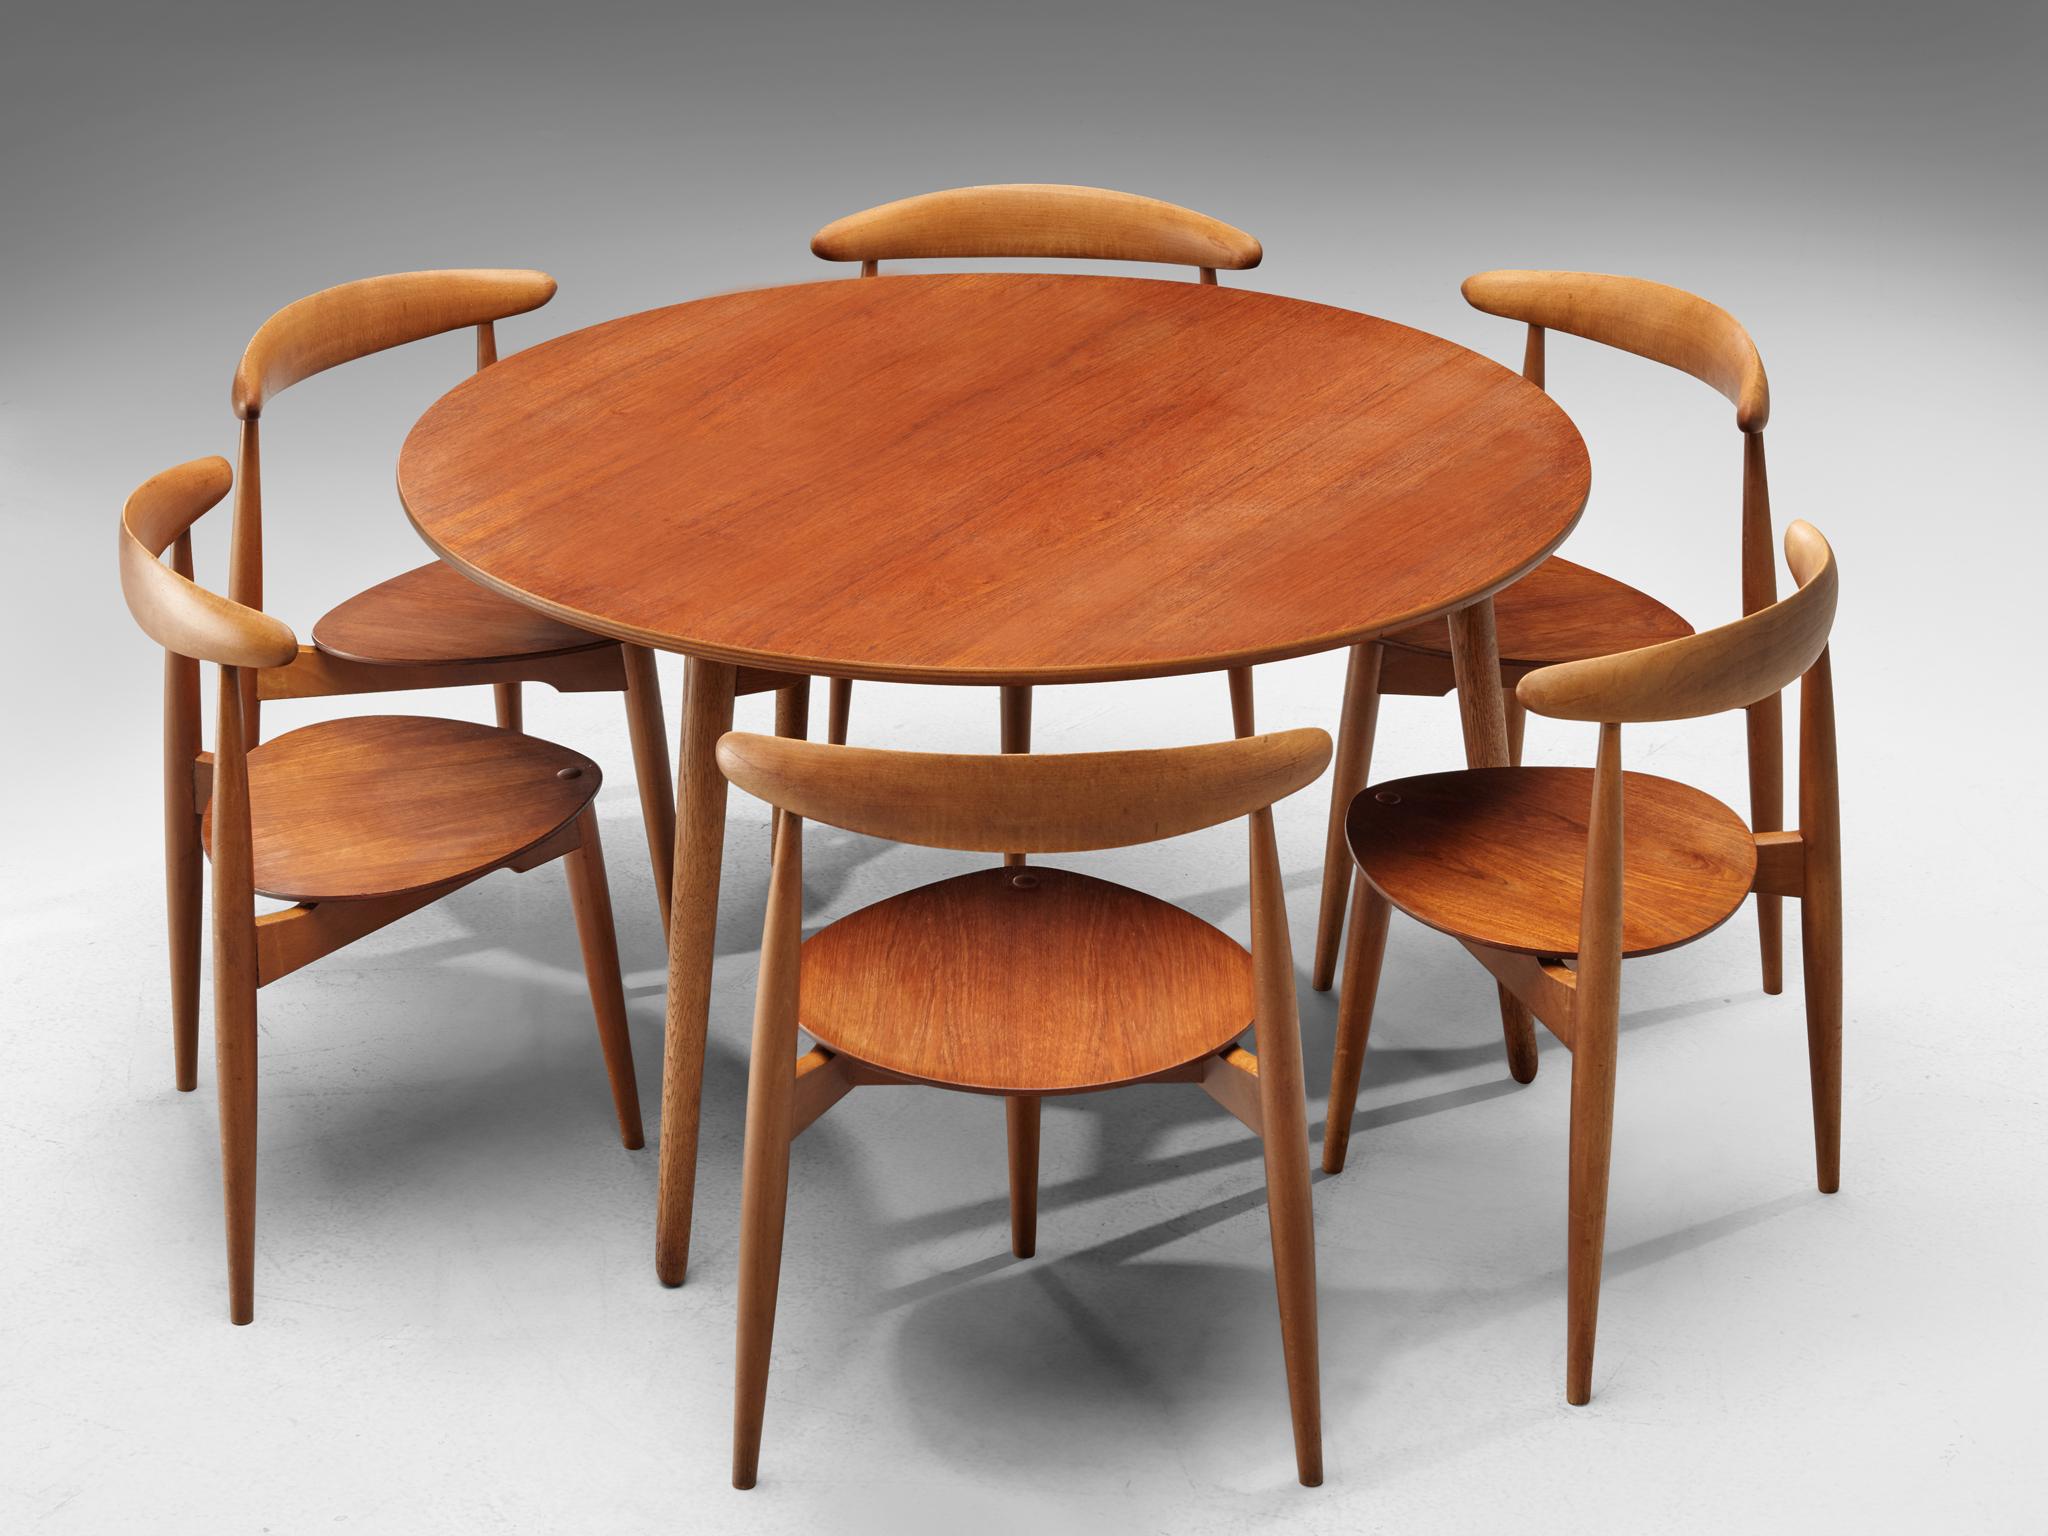 Hans Wegner, heart dining set with chairs and table, Denmark, beech and teak, 1953 (original design), 1960s execution.

Consisting of a tripod table and 